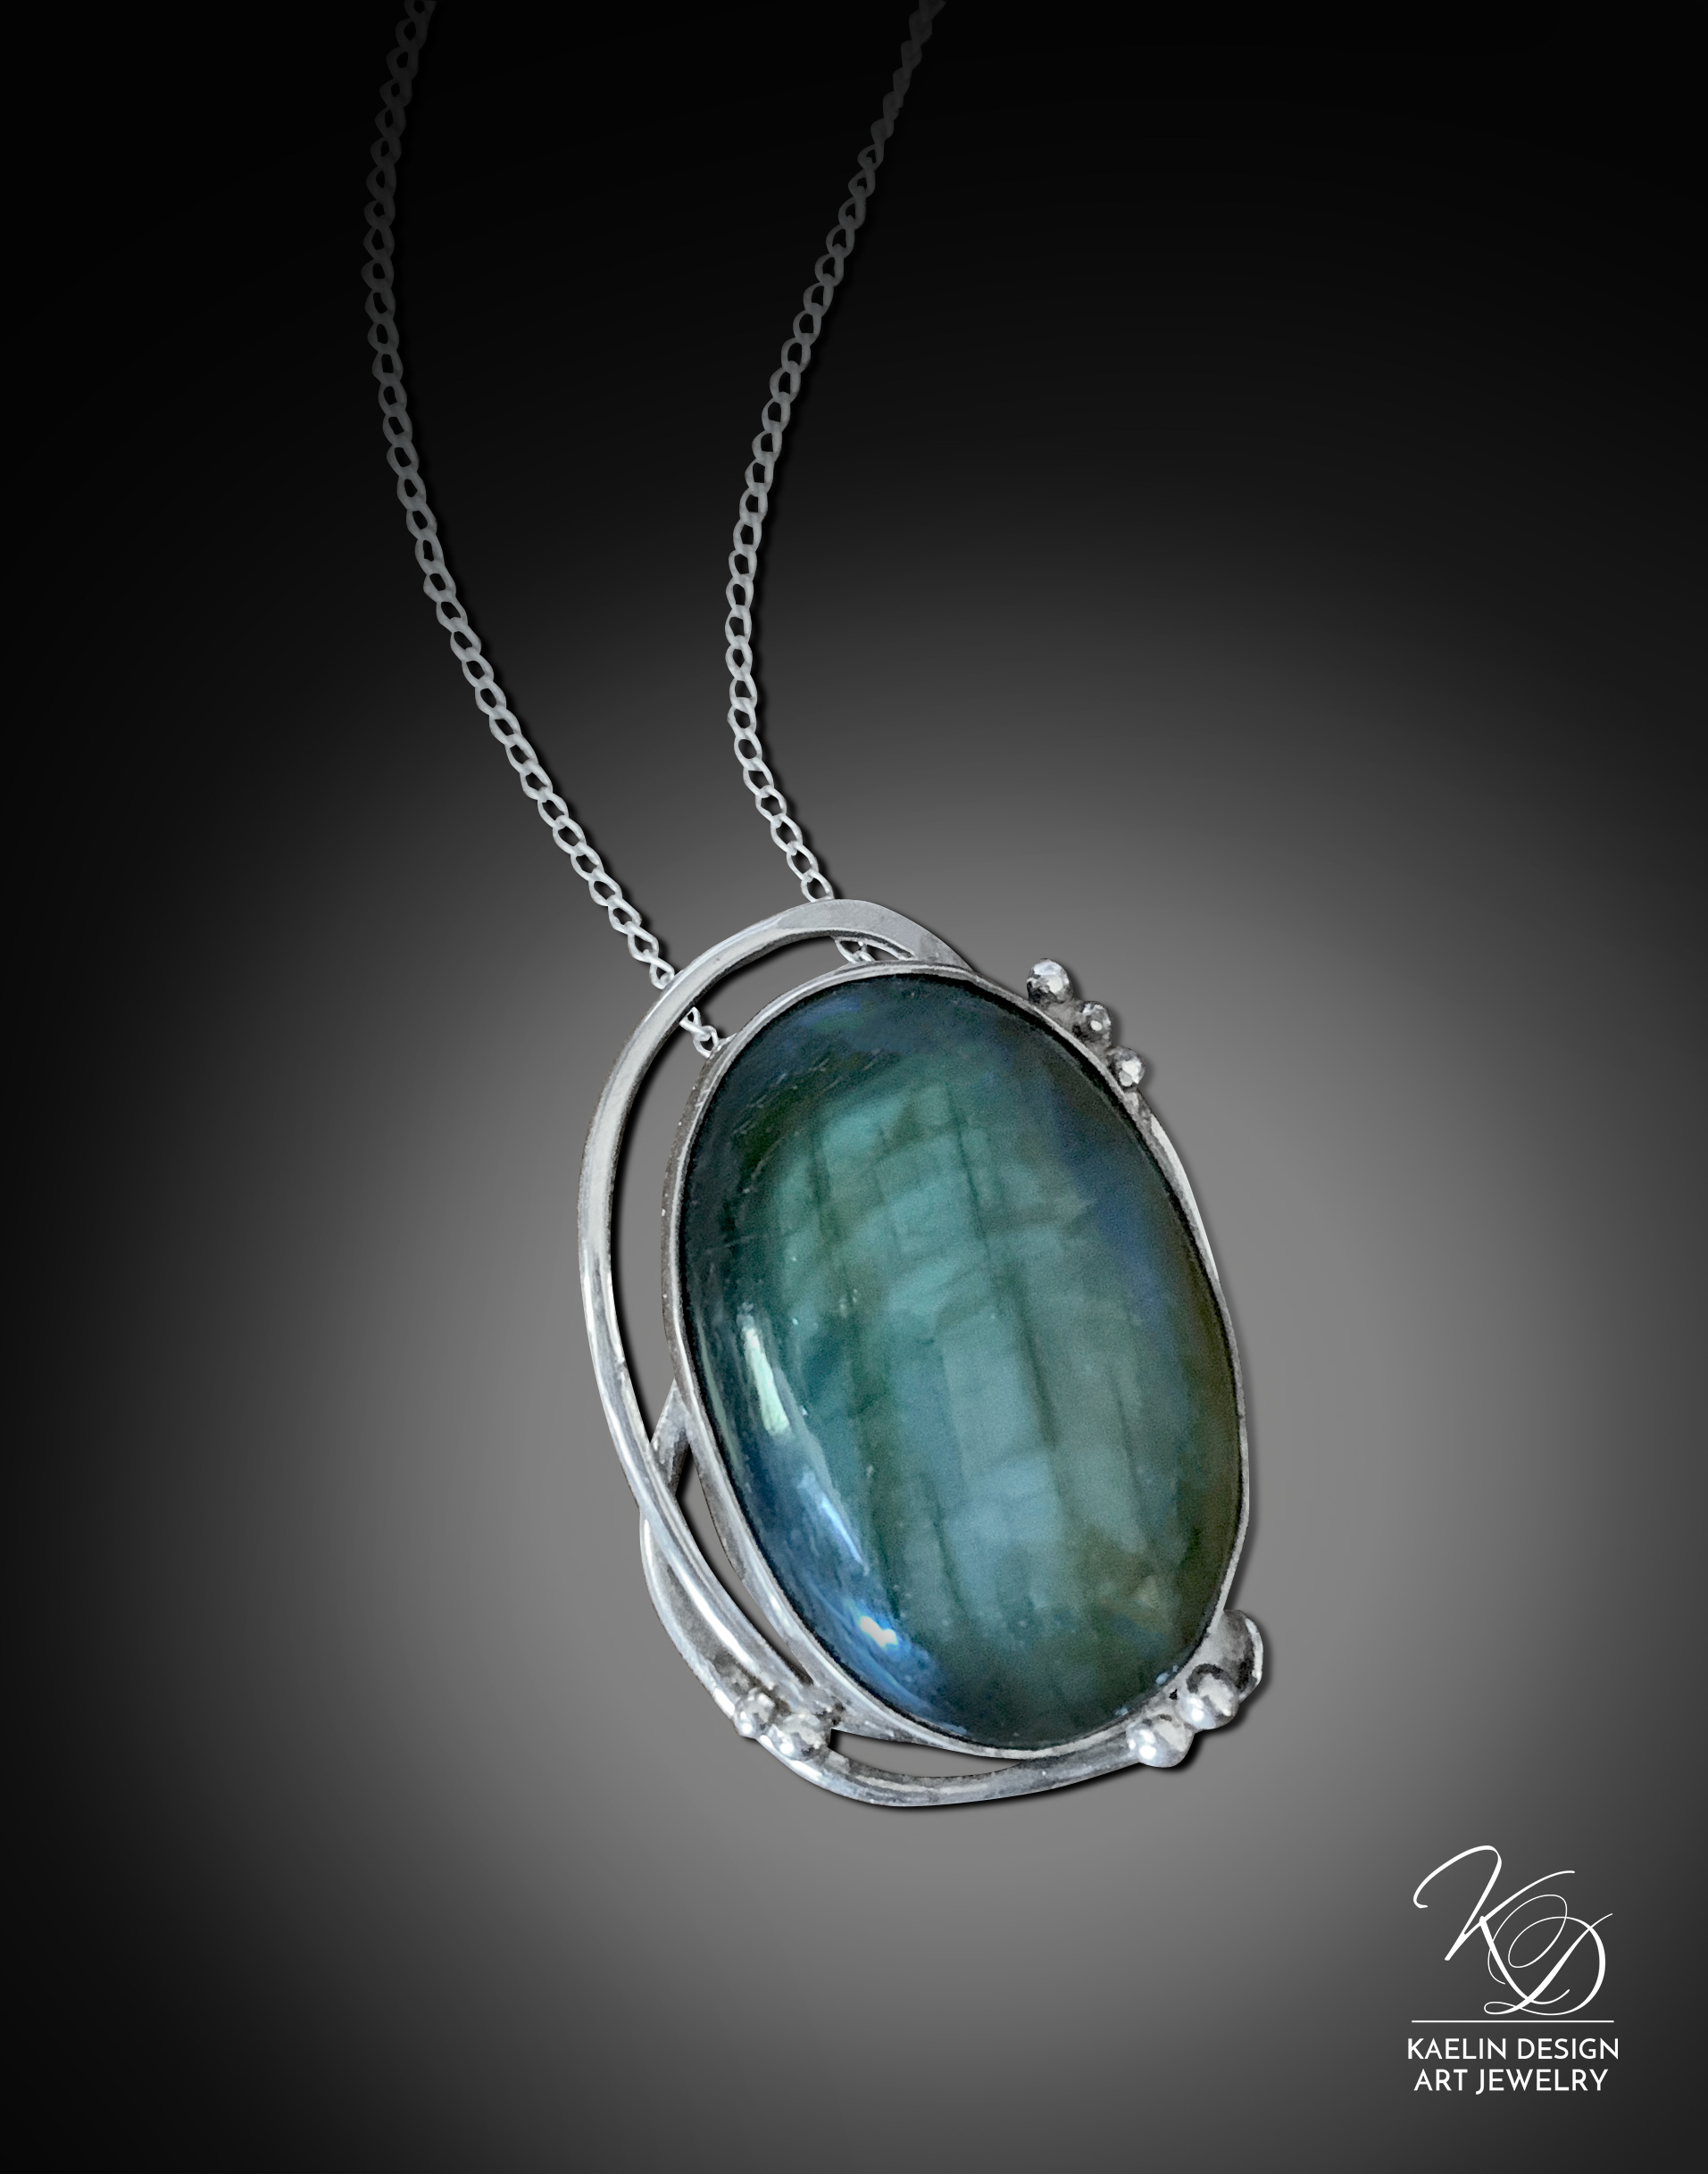 Tidal Currents Hand Forged Labradorite and Sterling Silver Art Pendant by Kaelin Design